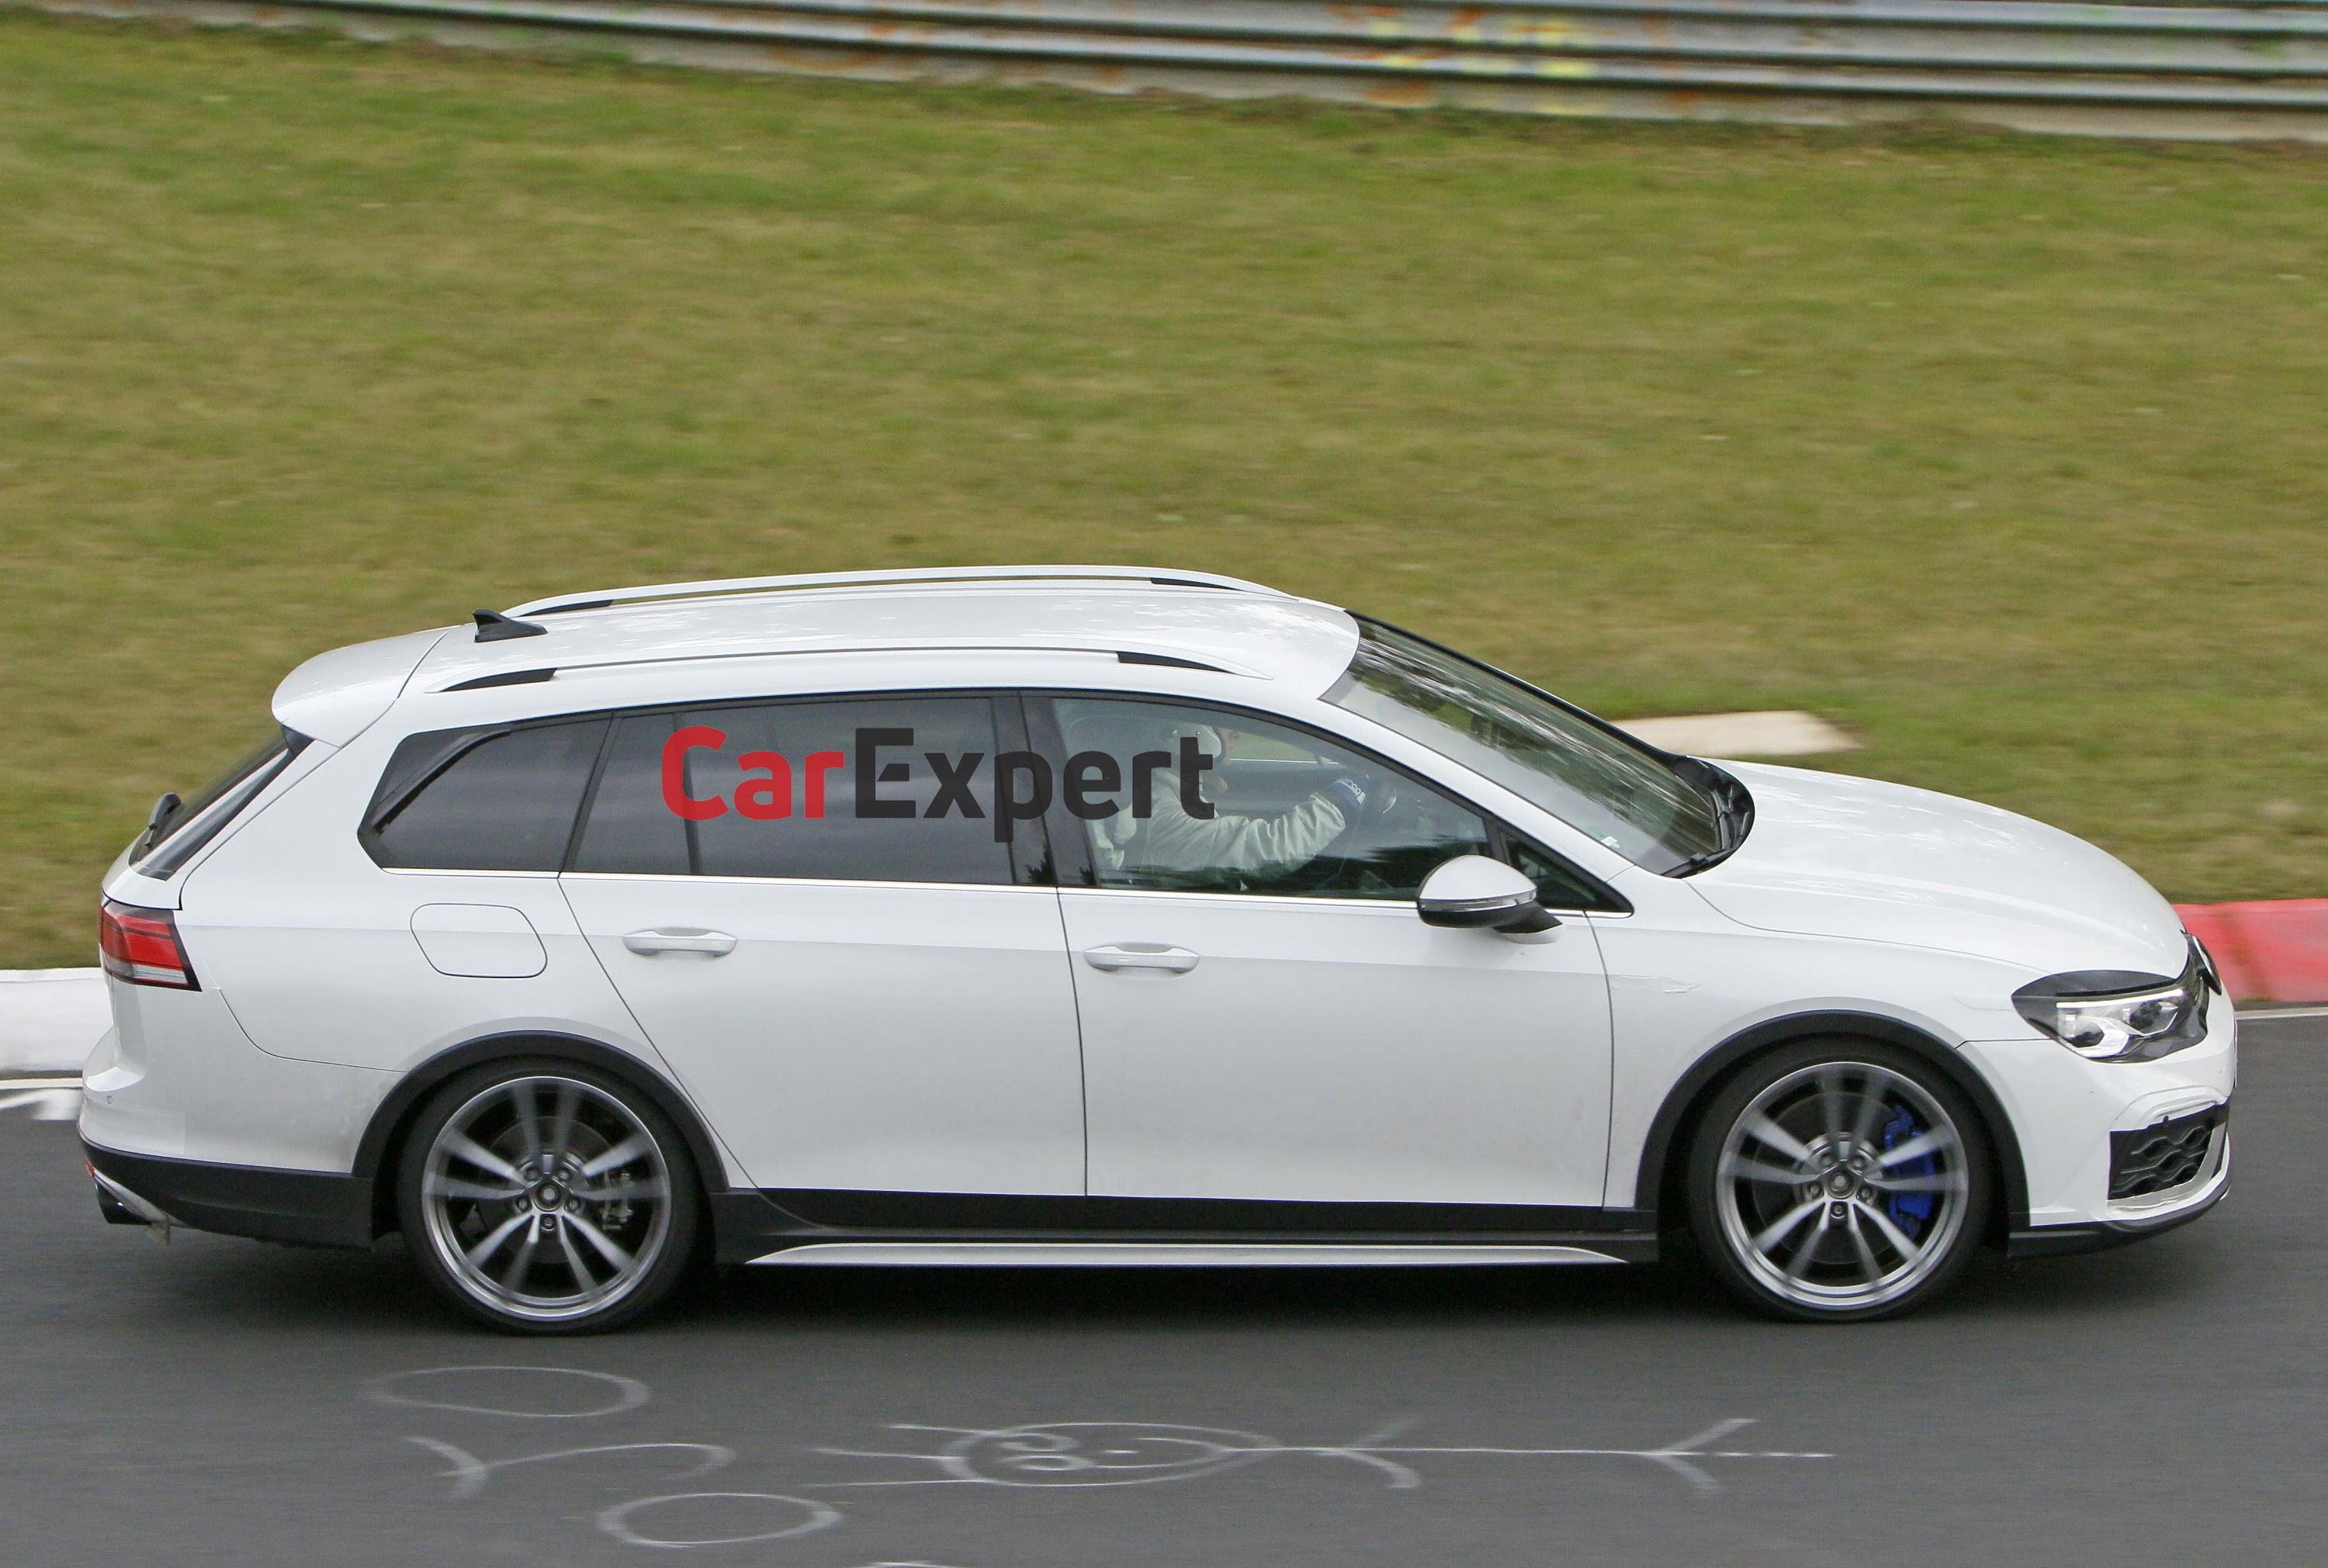 2021 Volkswagen Golf R Wagon spied, hatch and wagon here 2022 | CarExpert